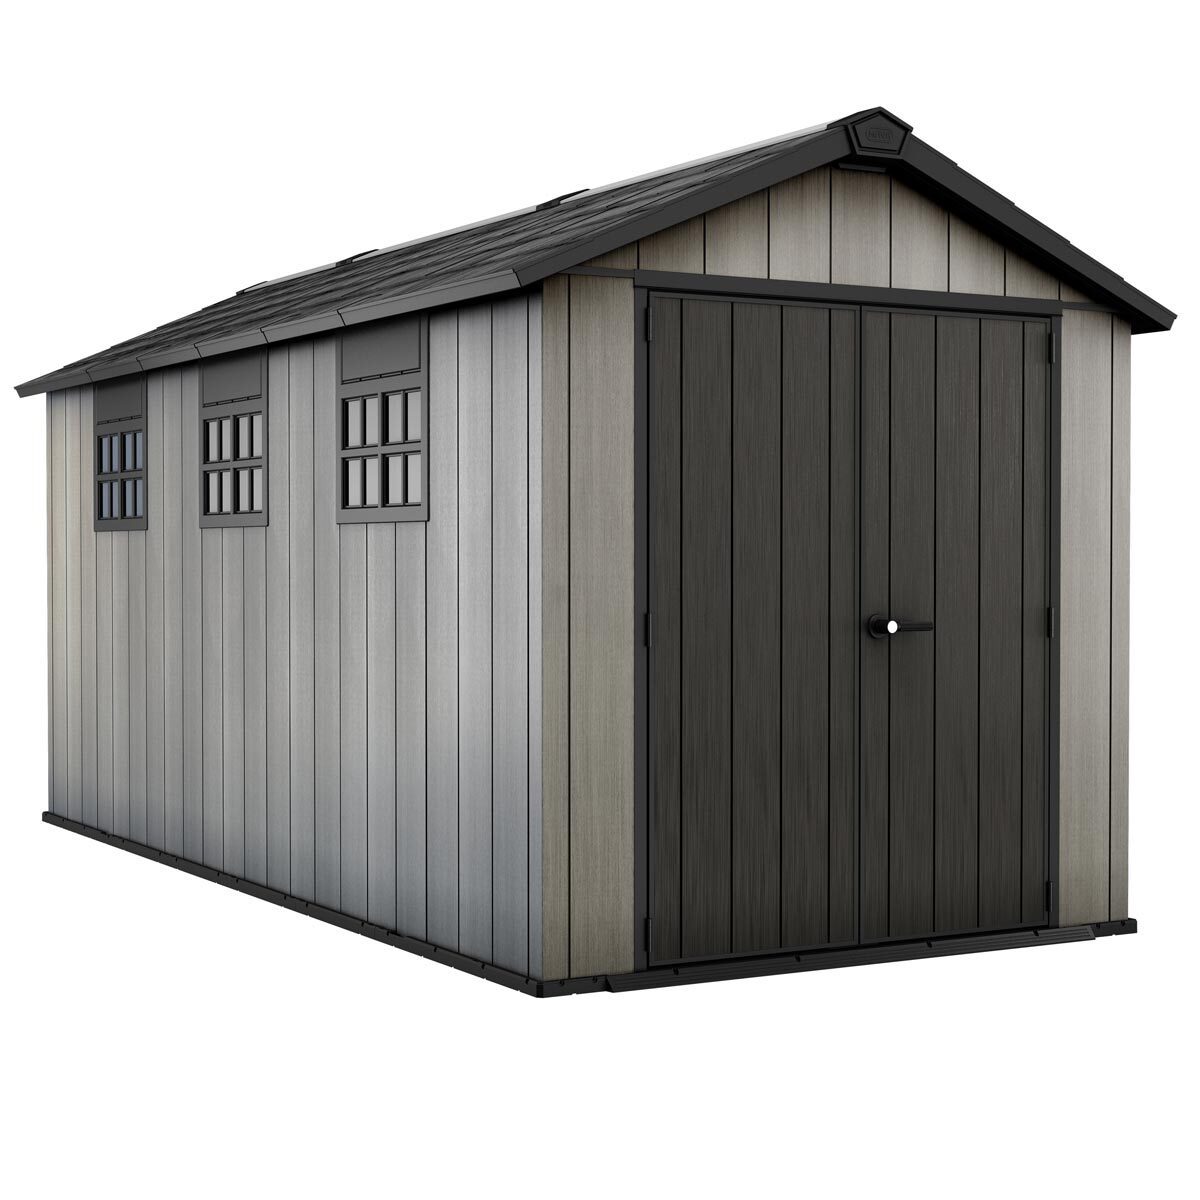 Keter Oakland 7ft 6" x 15ft 7" (2.3 x 4.7m) Outdoor Storage Shed